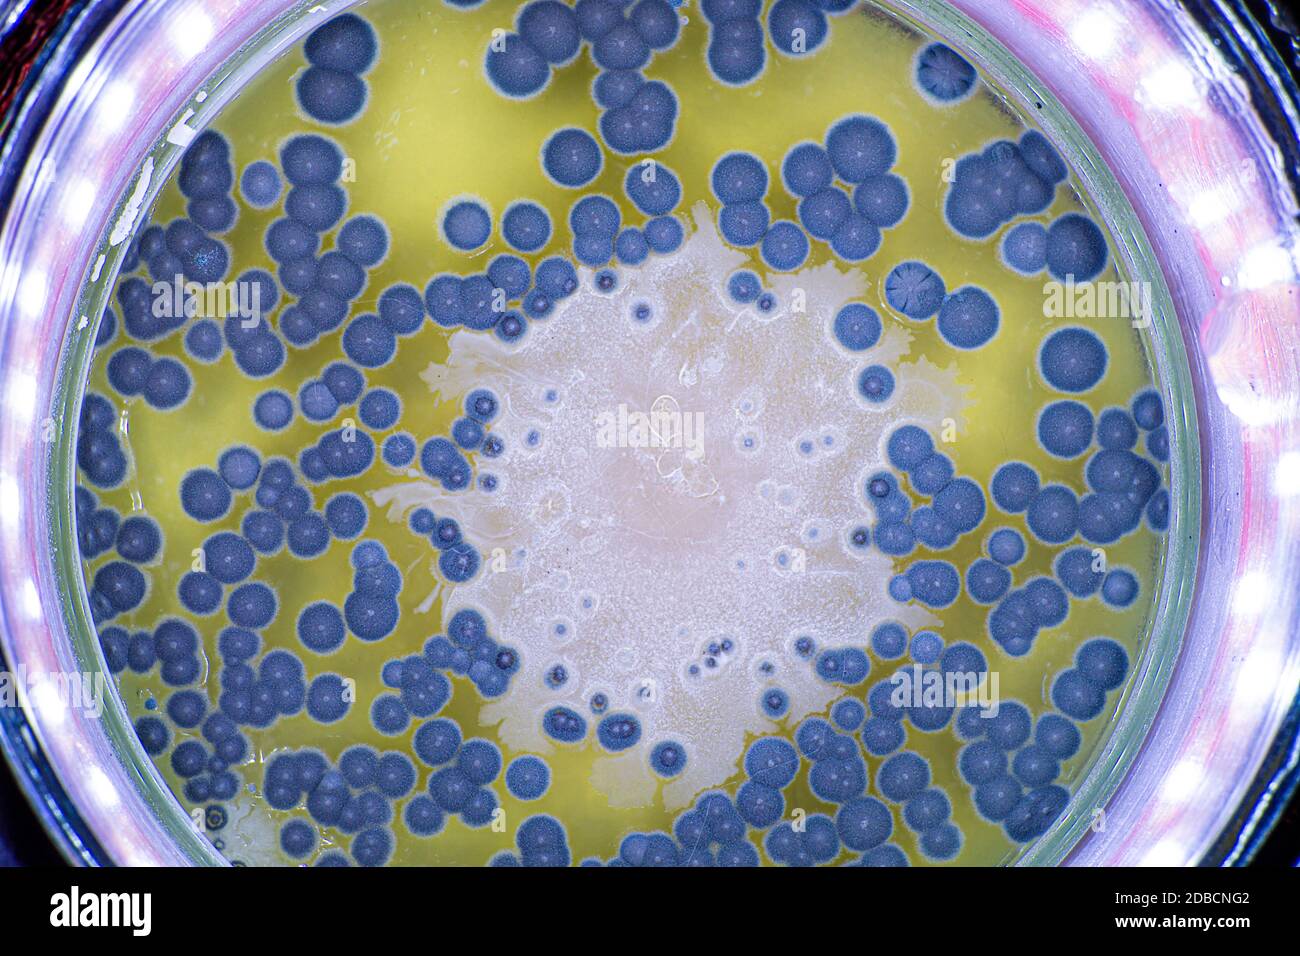 Growth of bacteria and mold in a petri dish Stock Photo